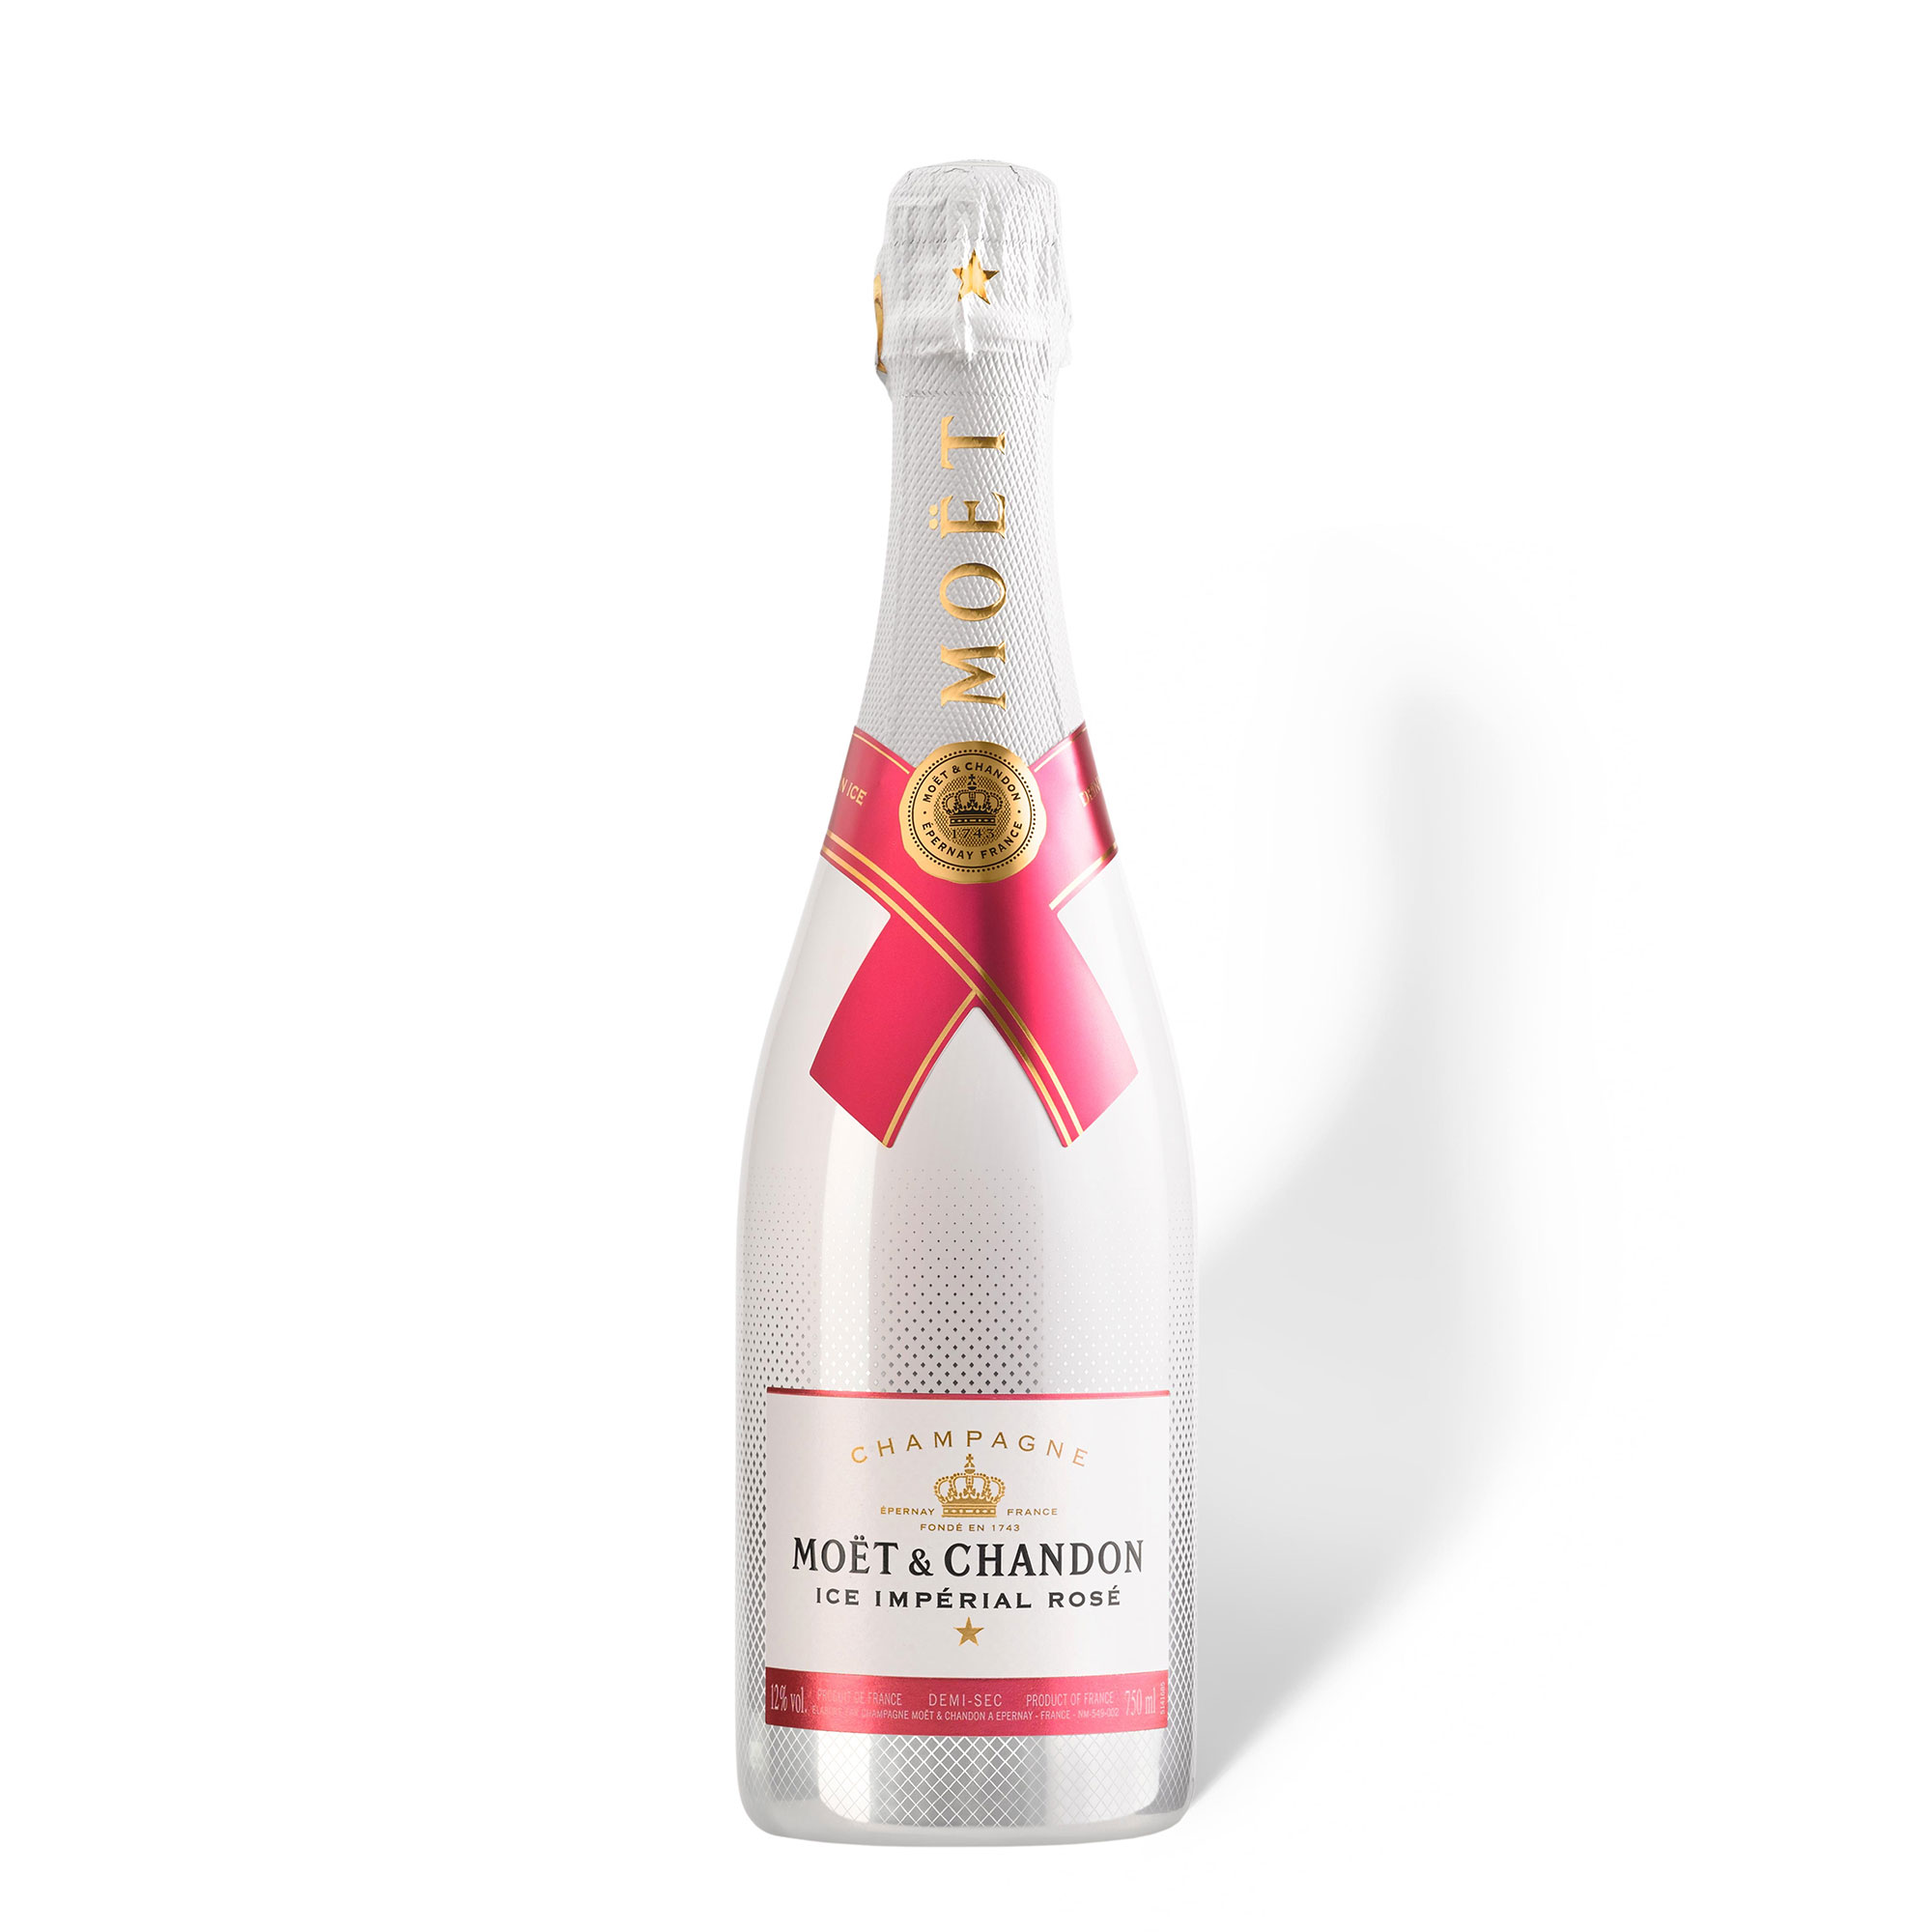 Moet And Chandon Ice Imperial Rose Champagne 75cl Great Price and Home Delivery